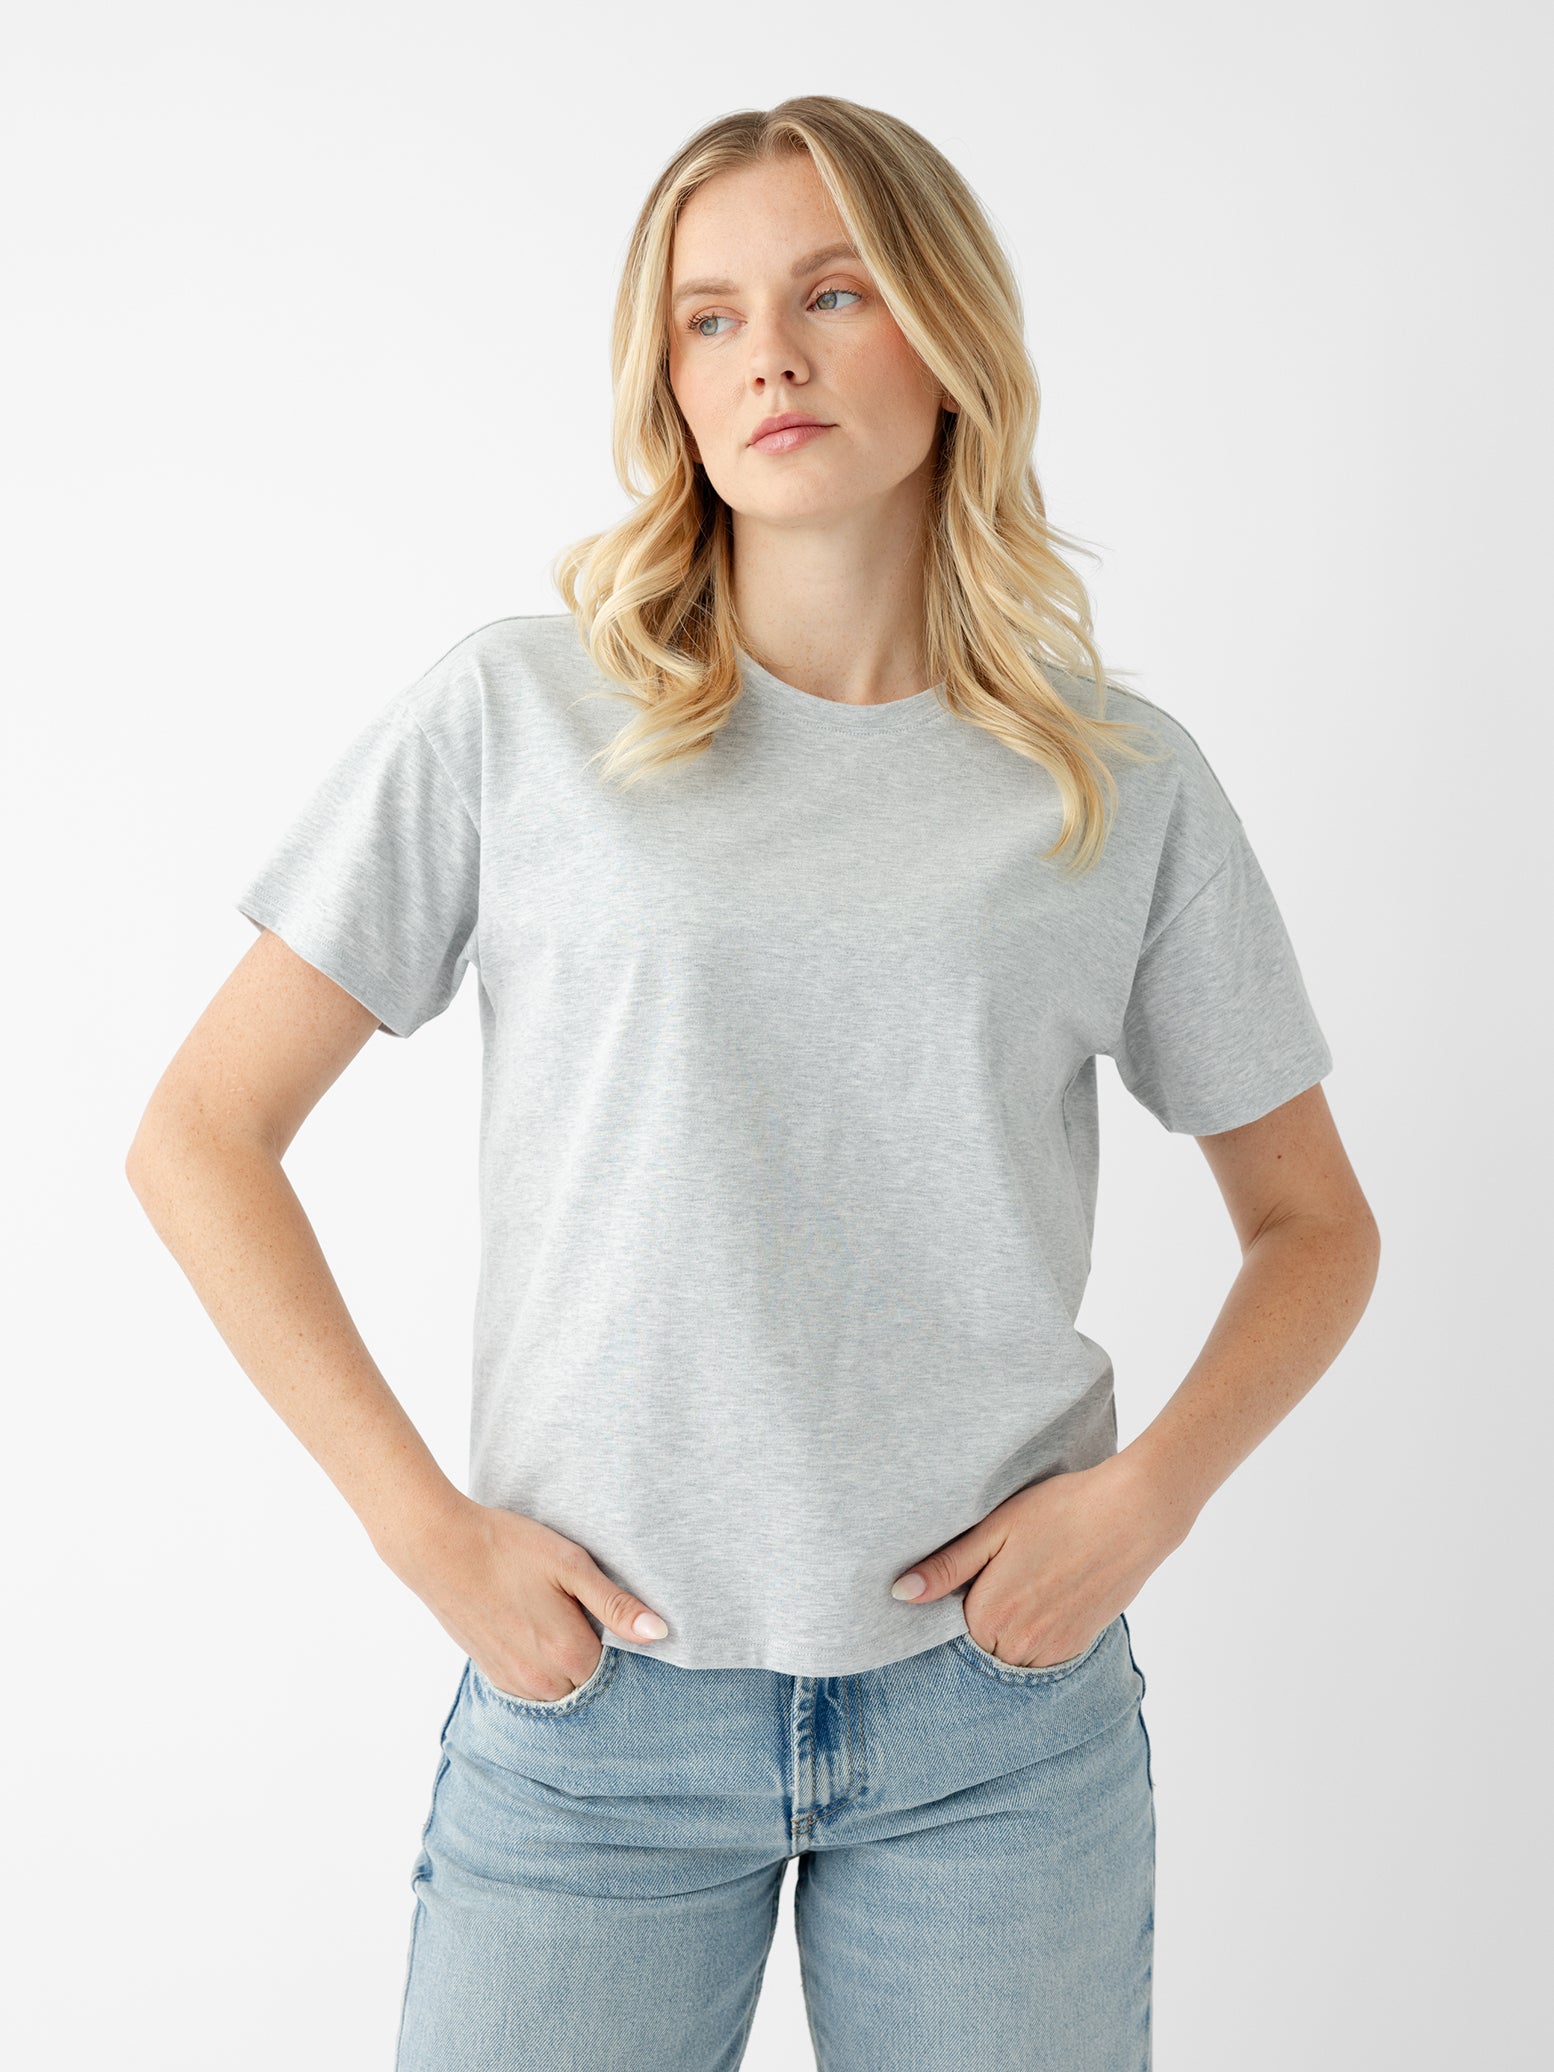 Woman wearing french dove heather tee with white background |Color:French Dove Heather